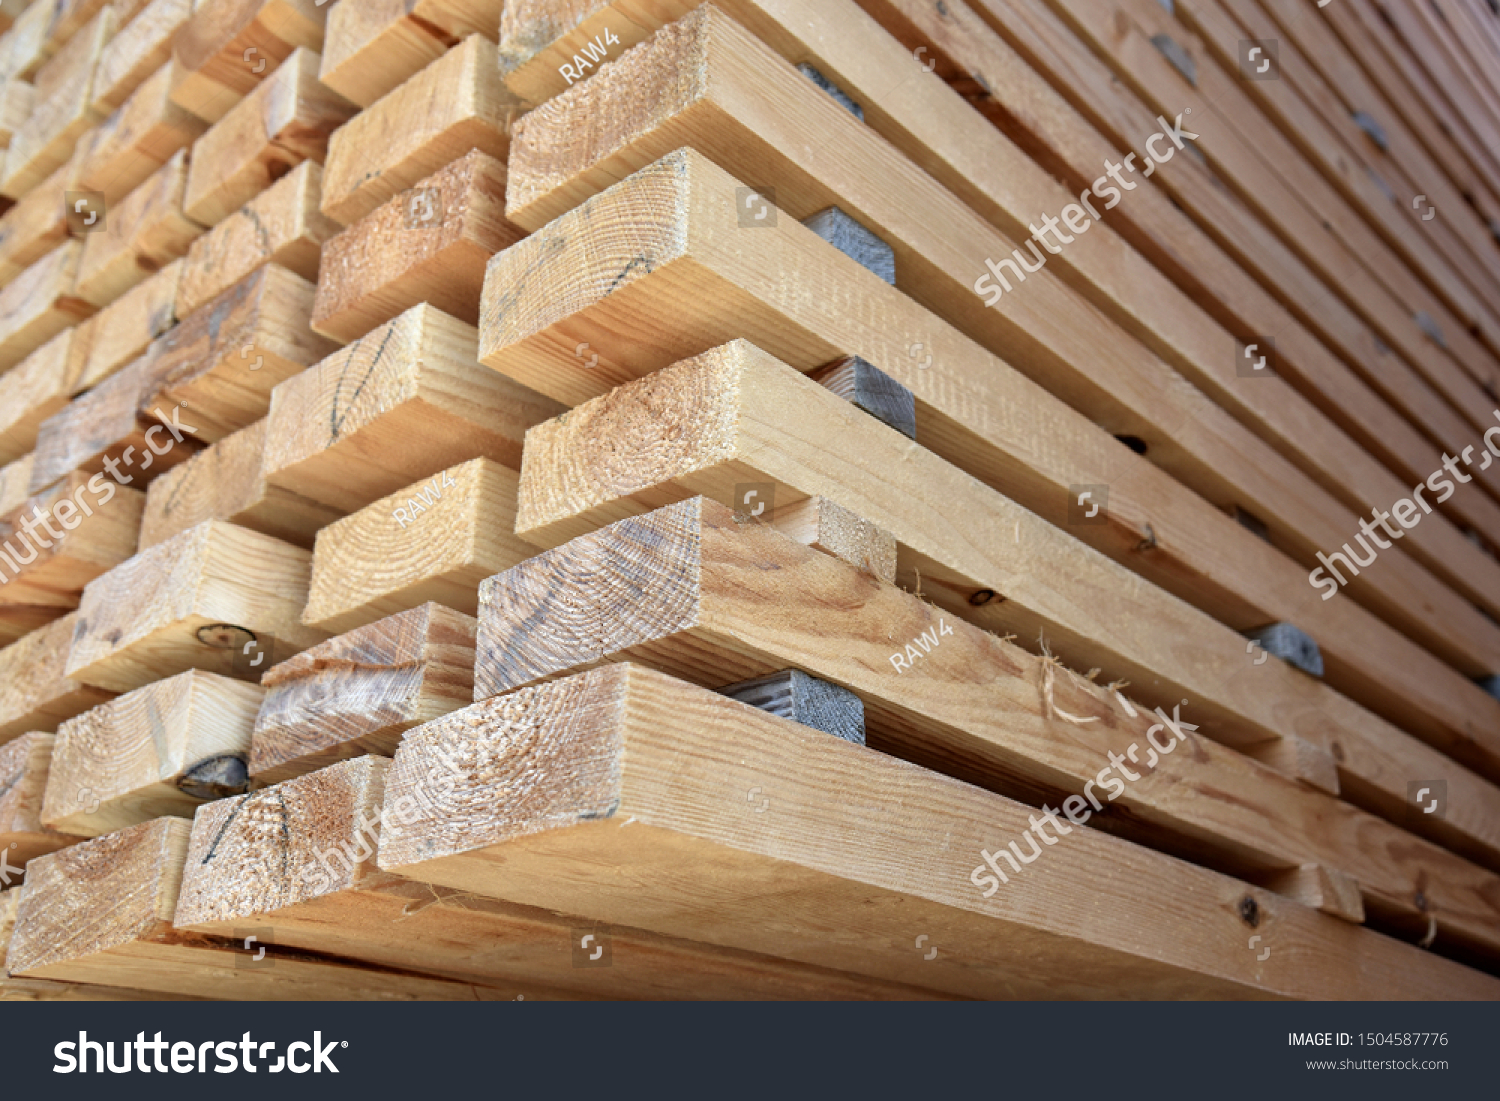 The end part of the dried wooden beam is piled in a pile in the warehouse. #1504587776